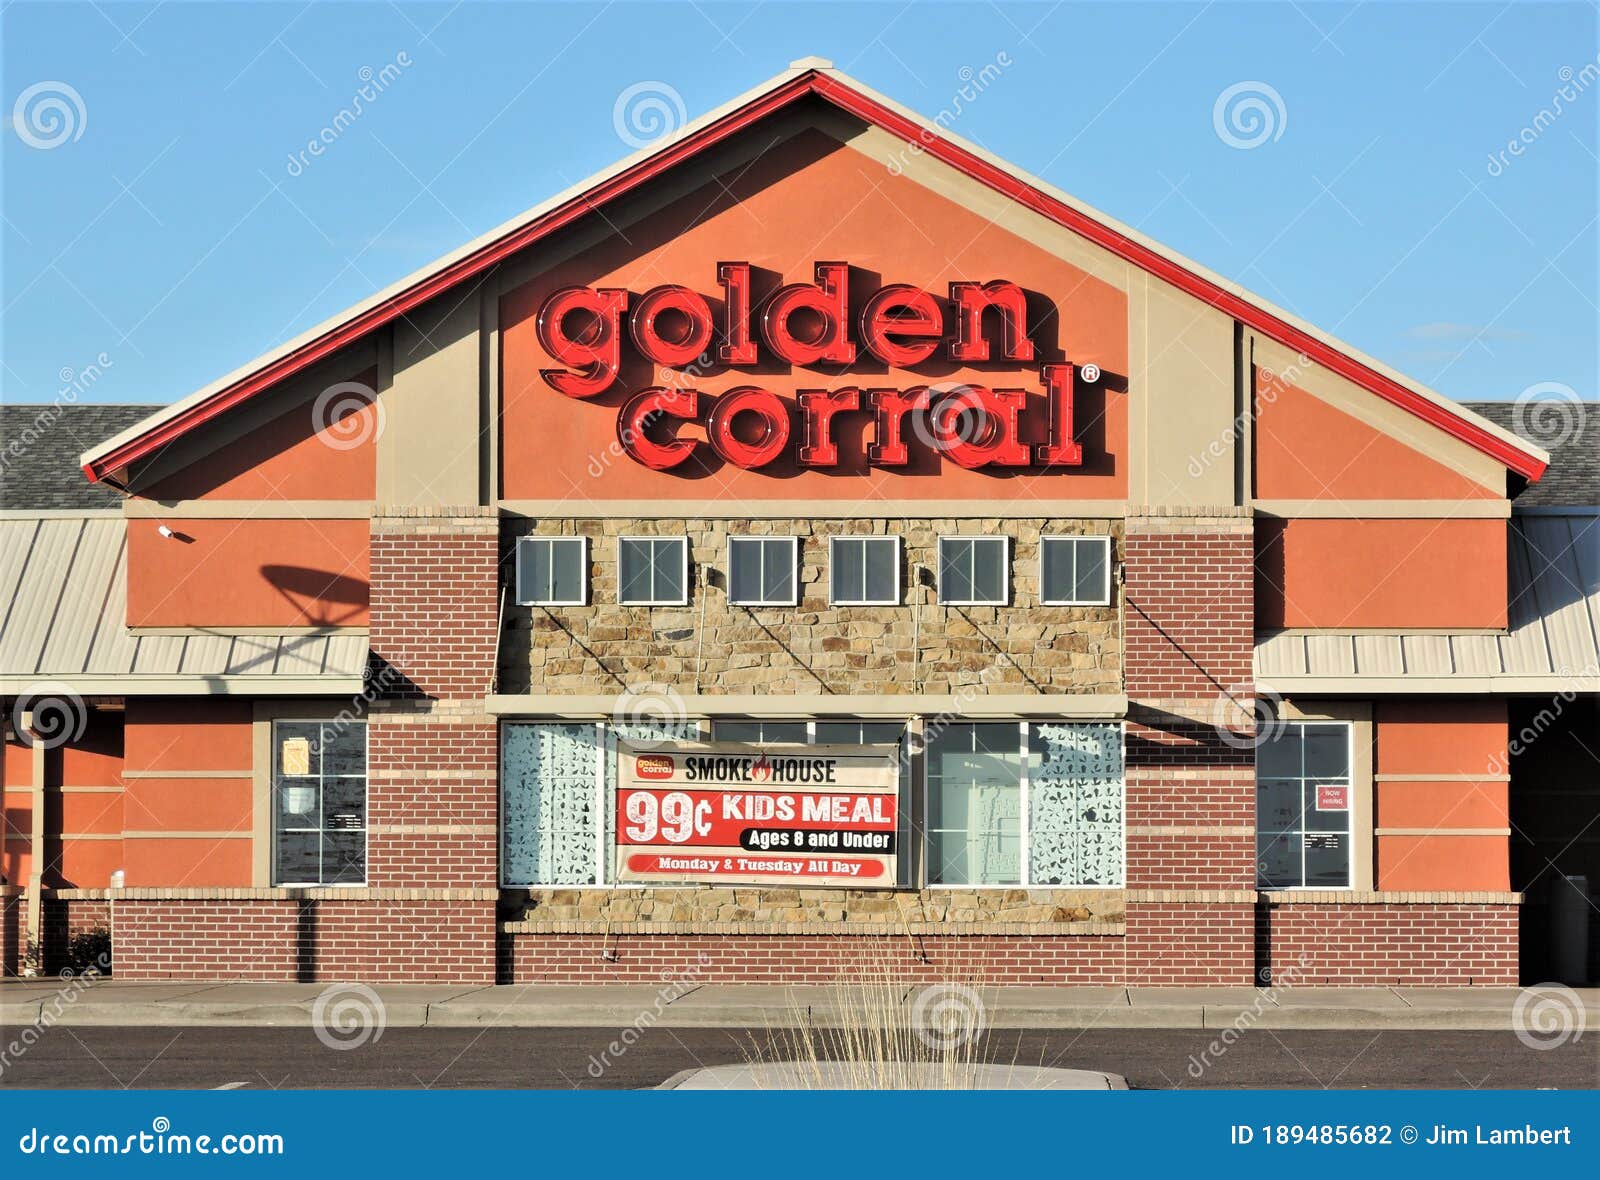 Does Golden Corral Spangles Serve Breakfast All Day?